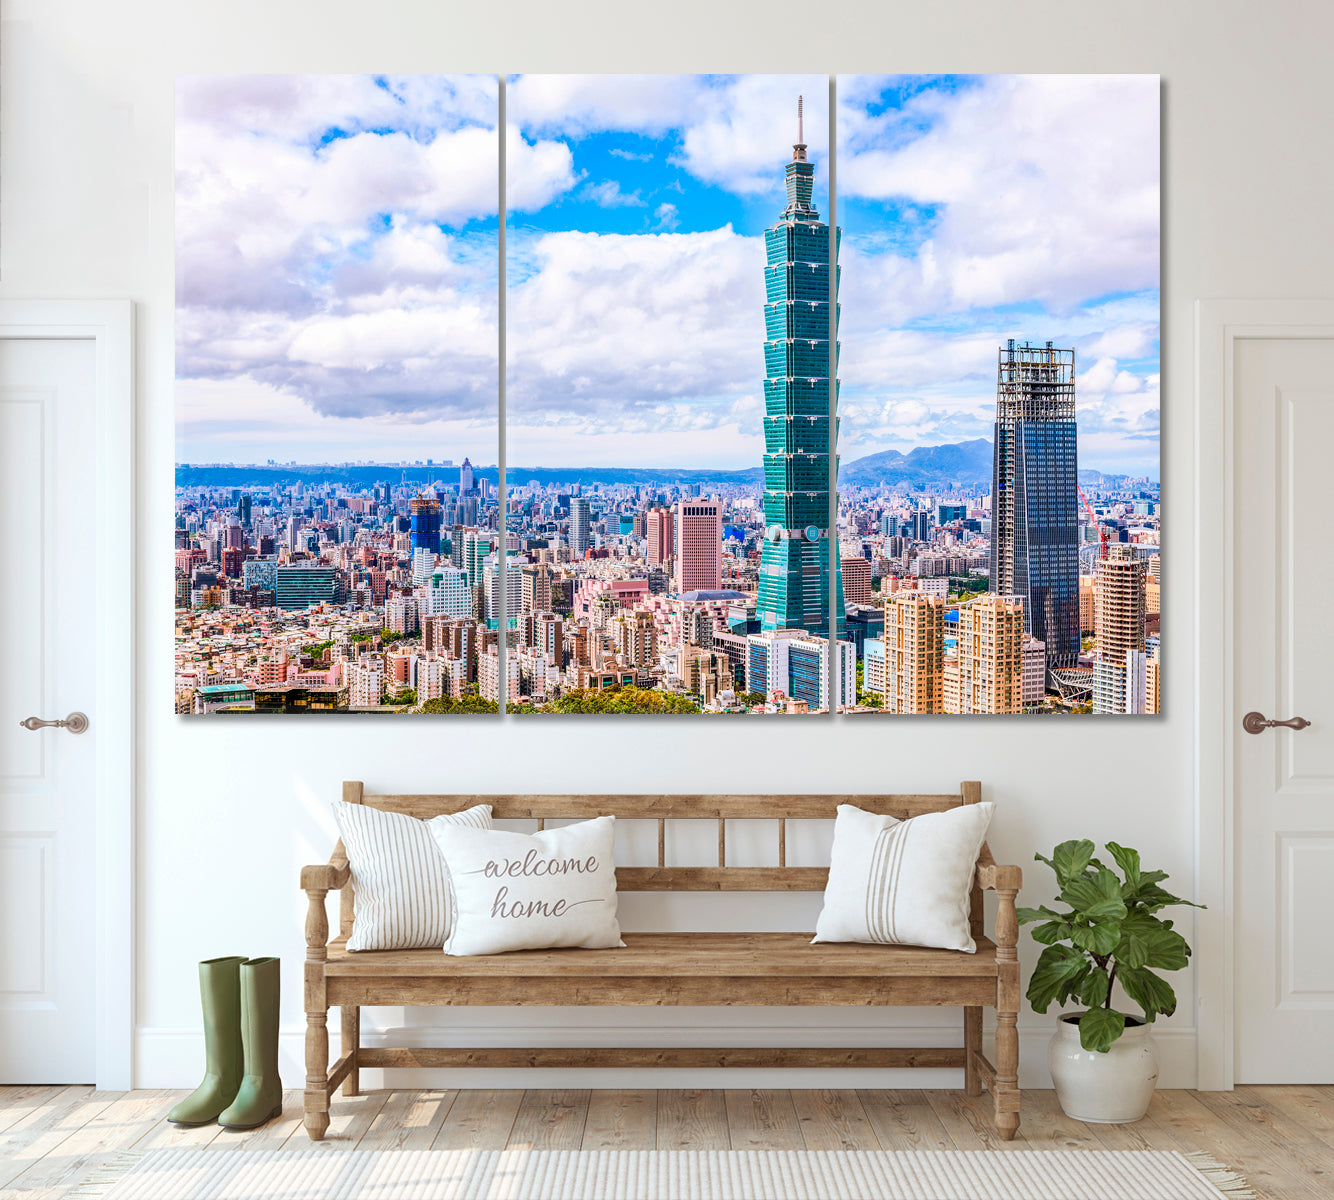 Taipei Downtown with Taipei 101 Skyscraper Canvas Print ArtLexy 3 Panels 36"x24" inches 